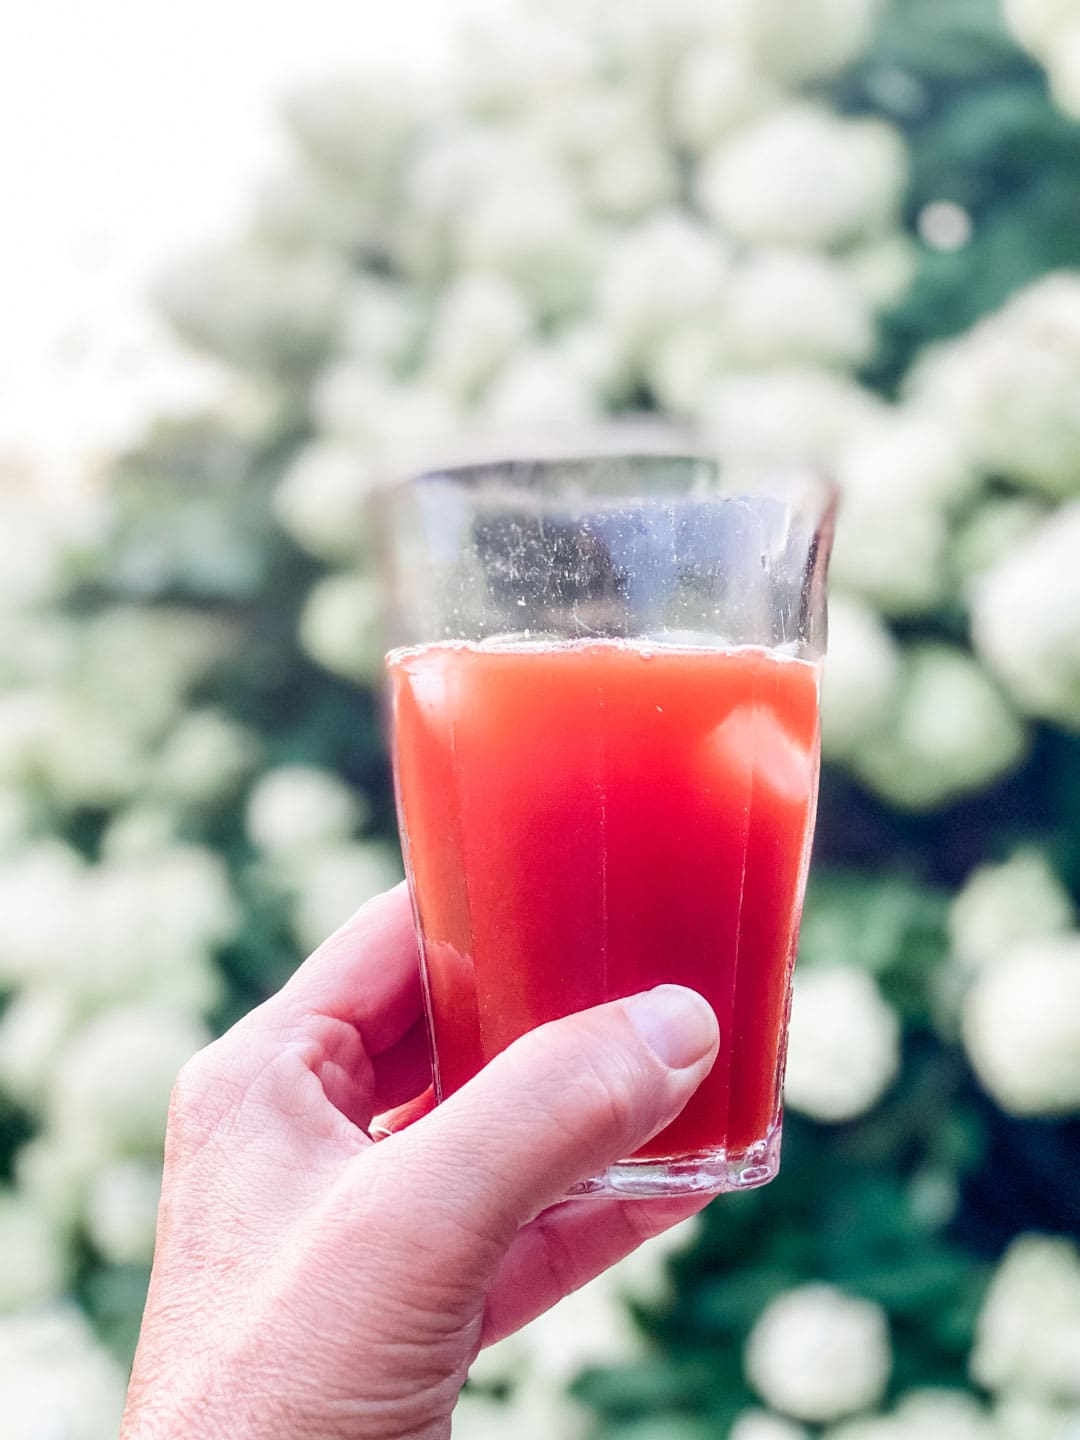 Lifestyle blogger Annie Diamond shares how she lost 10 pounds over the course of a year replacing an afternoon "snack" with a glass of NingXia Red